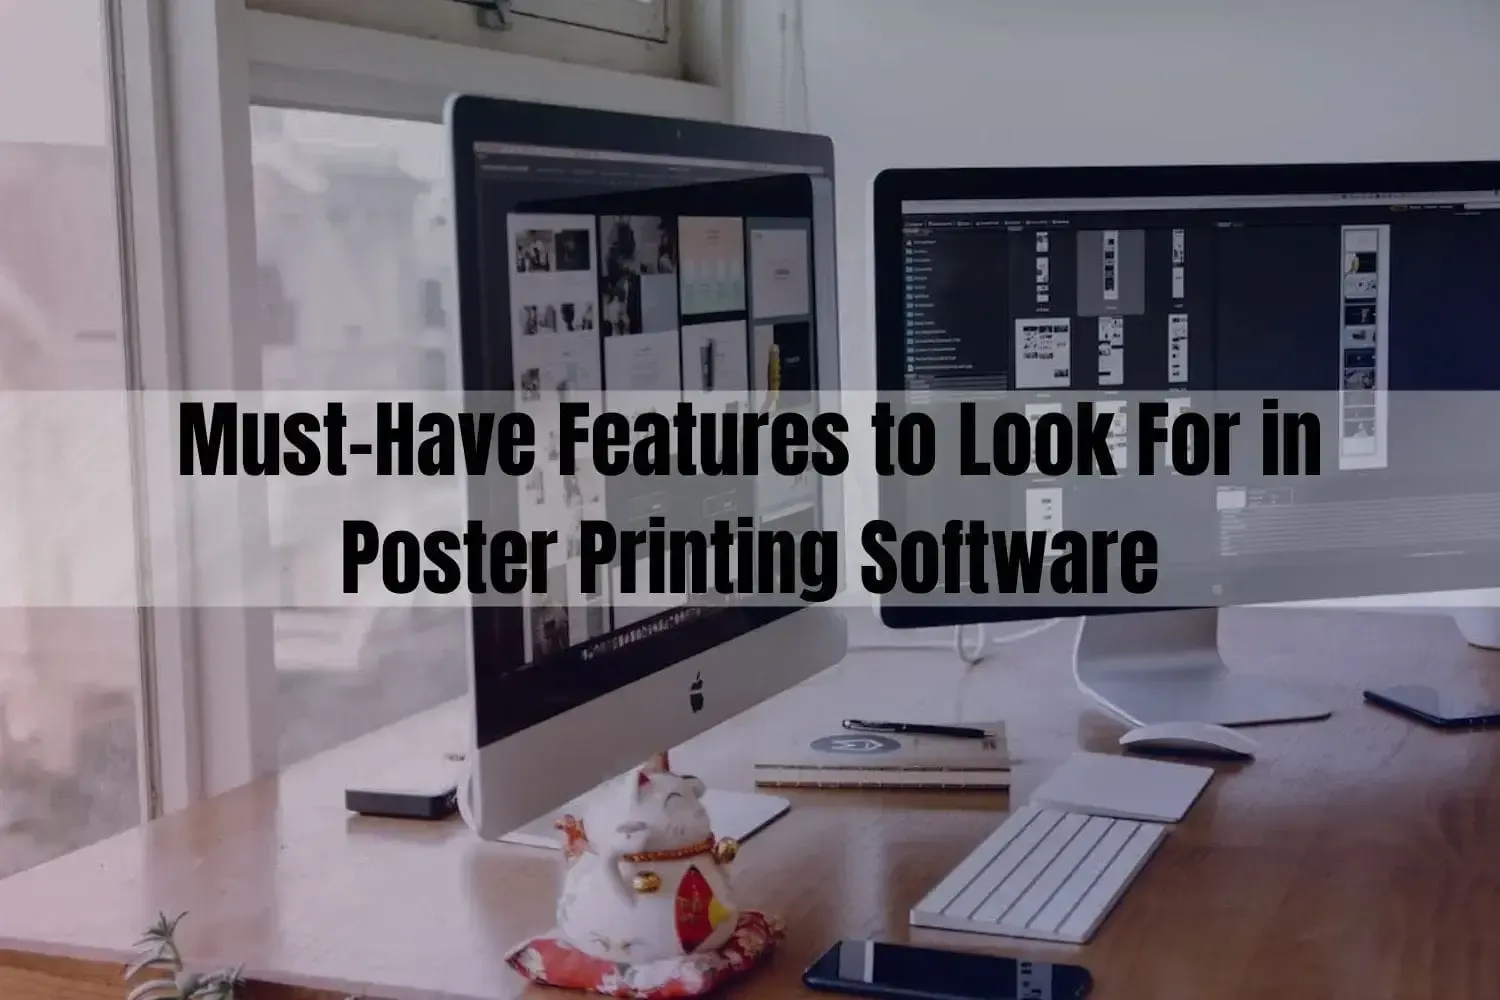 Key Features to Look For in Poster Printing Software